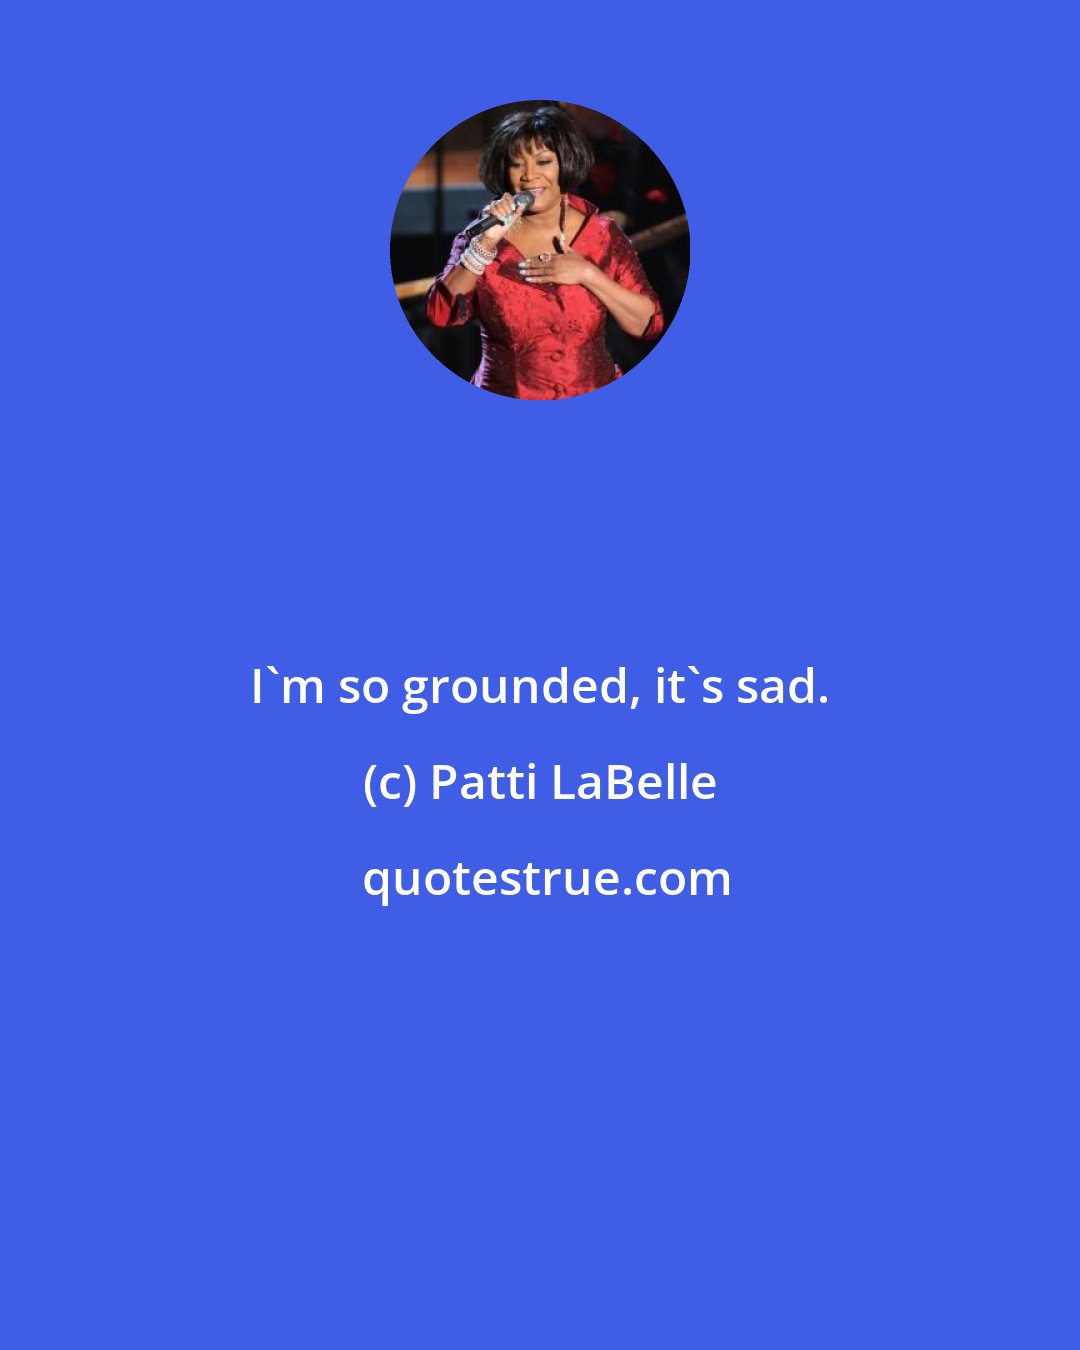 Patti LaBelle: I'm so grounded, it's sad.